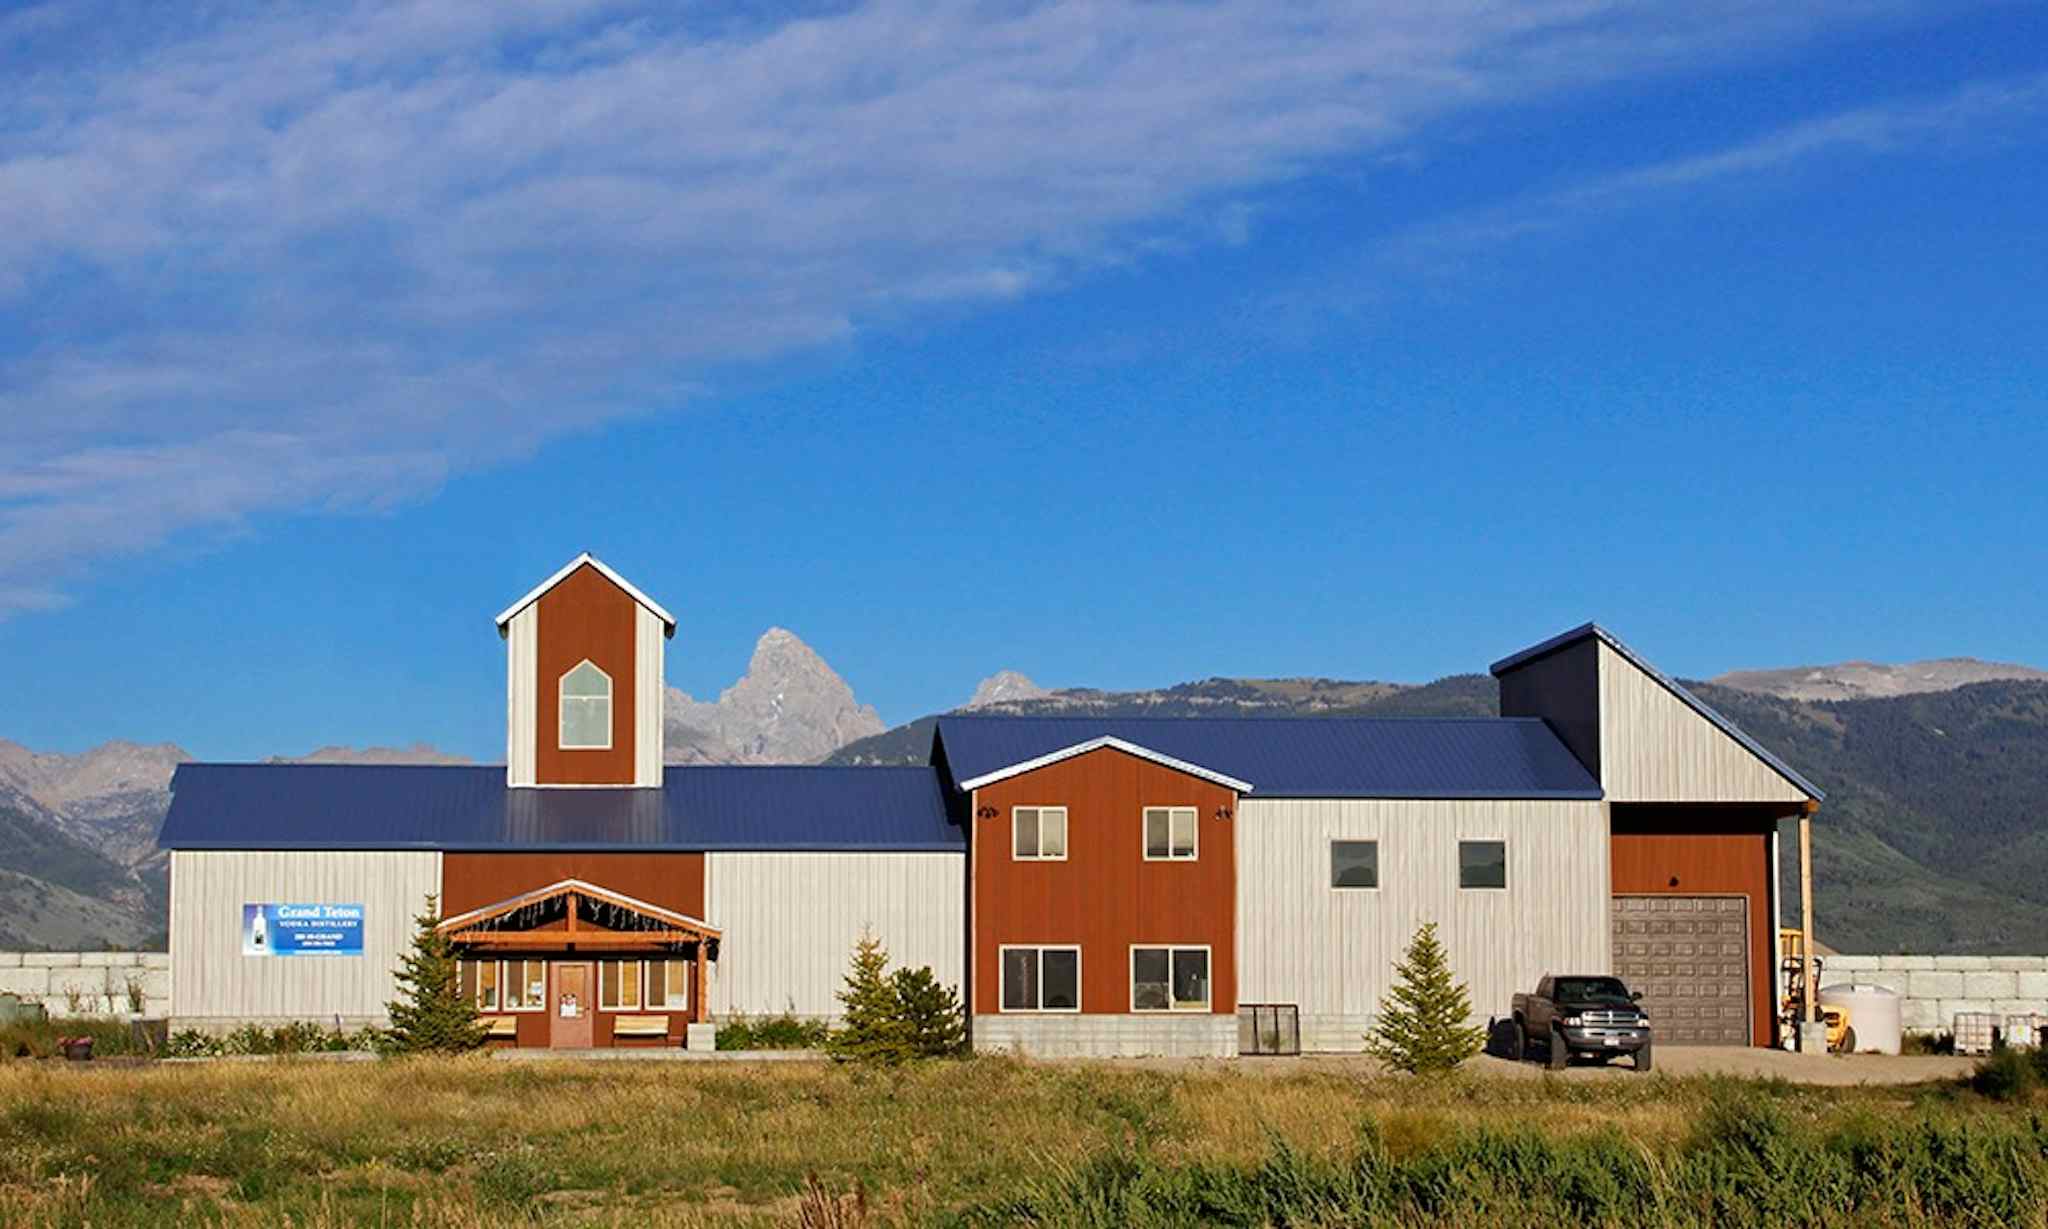 Outside view of the Grand Teton Distillery, with a beautiful view of the mountains from which the business gets its name